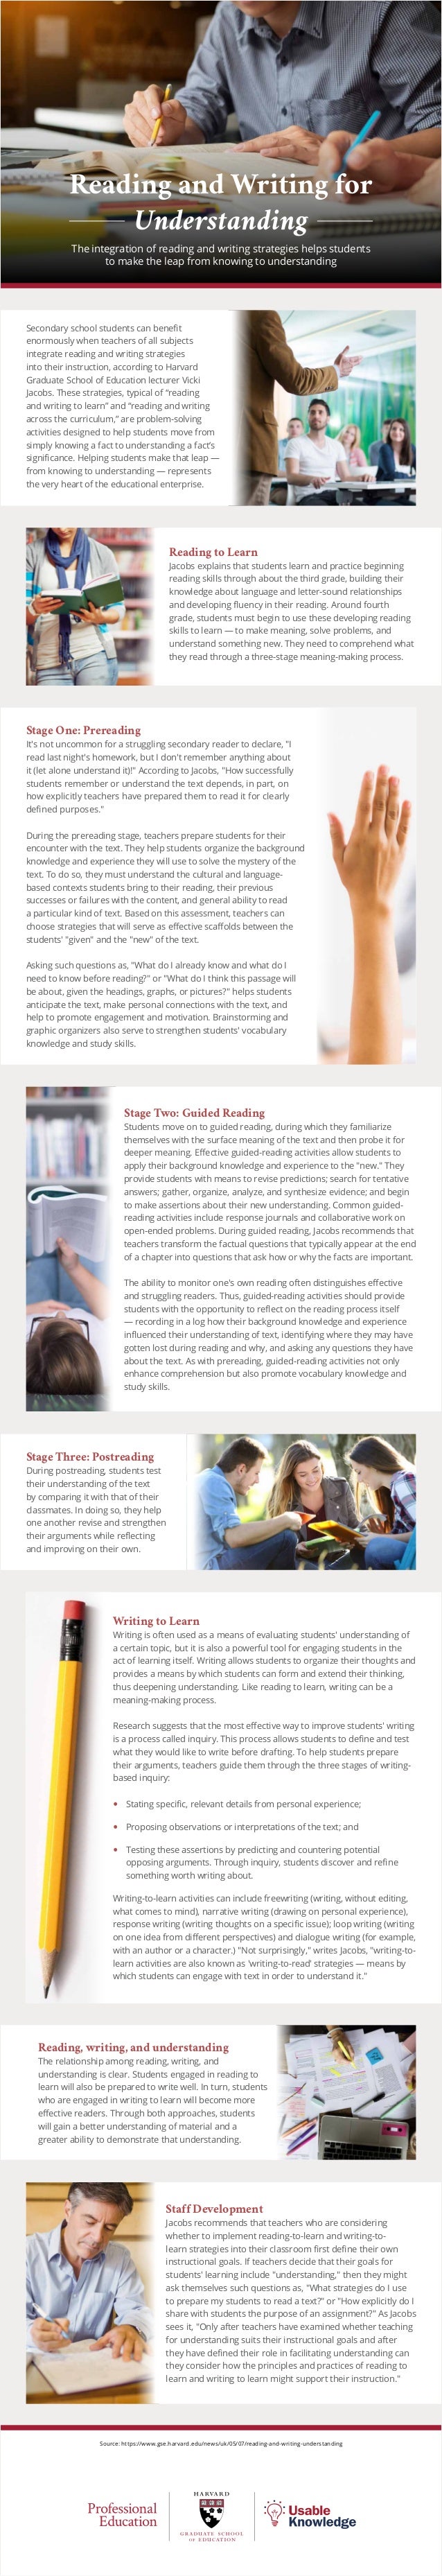 Reading and Writing for Understanding